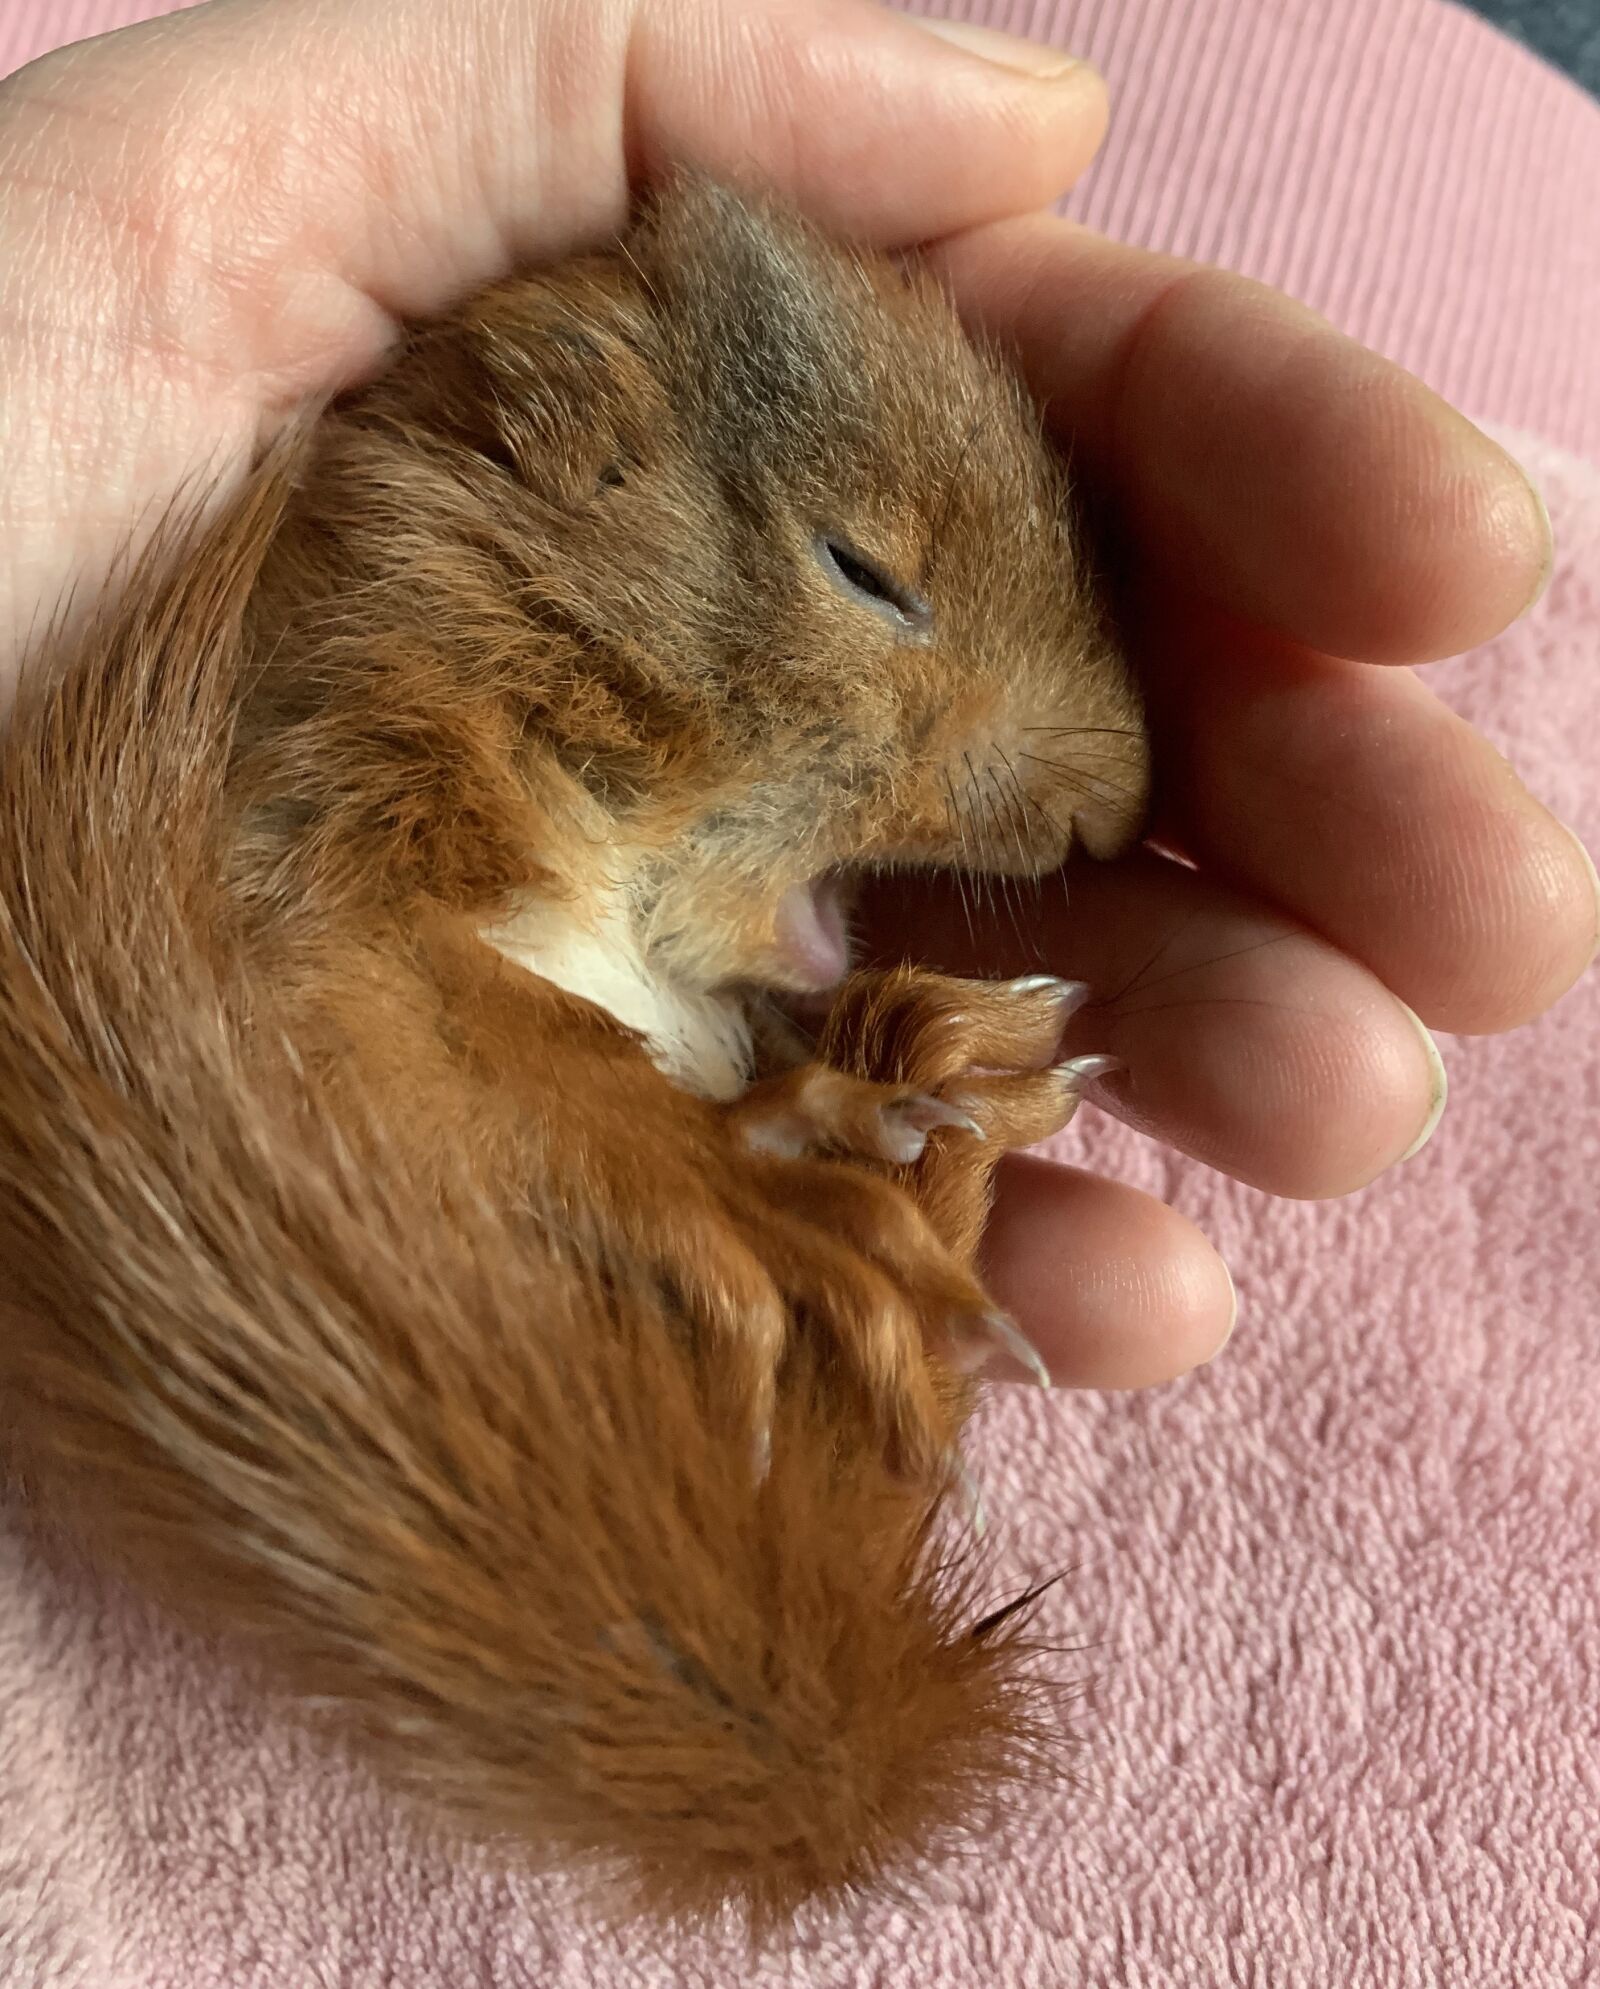 Apple iPhone XS Max sample photo. Baby, squirrel, protection of photography